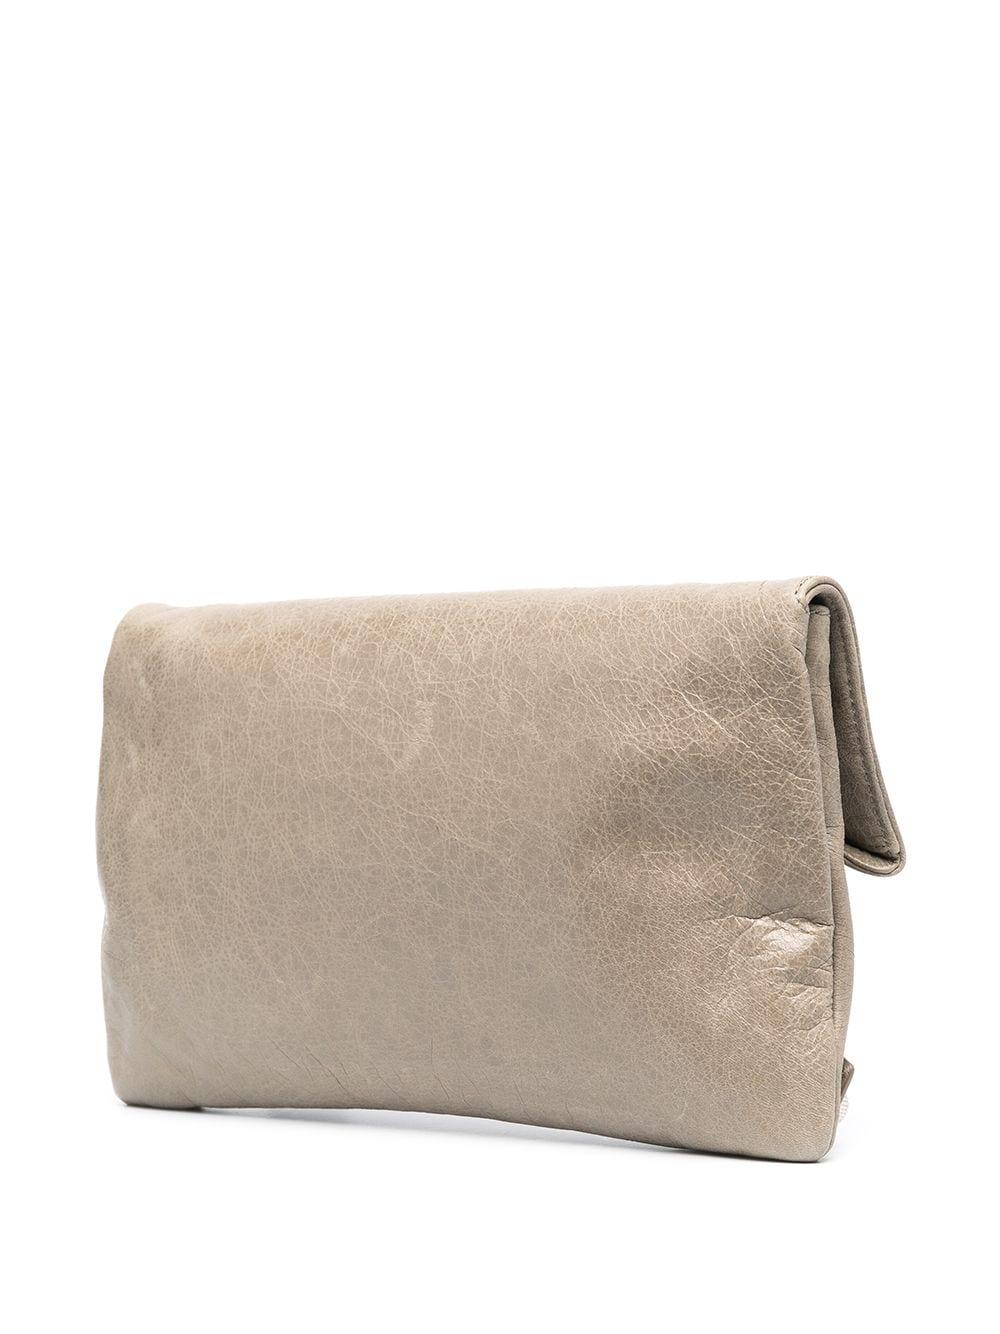 Exude the utilitarian sensibility of Demna Gvasalia's new Balenciaga with this vintage envelope clutch. In a shade of greige, its fold-over profile is accented with straps and silver-tone studs for a contemporary appeal. It opens with a magnetic